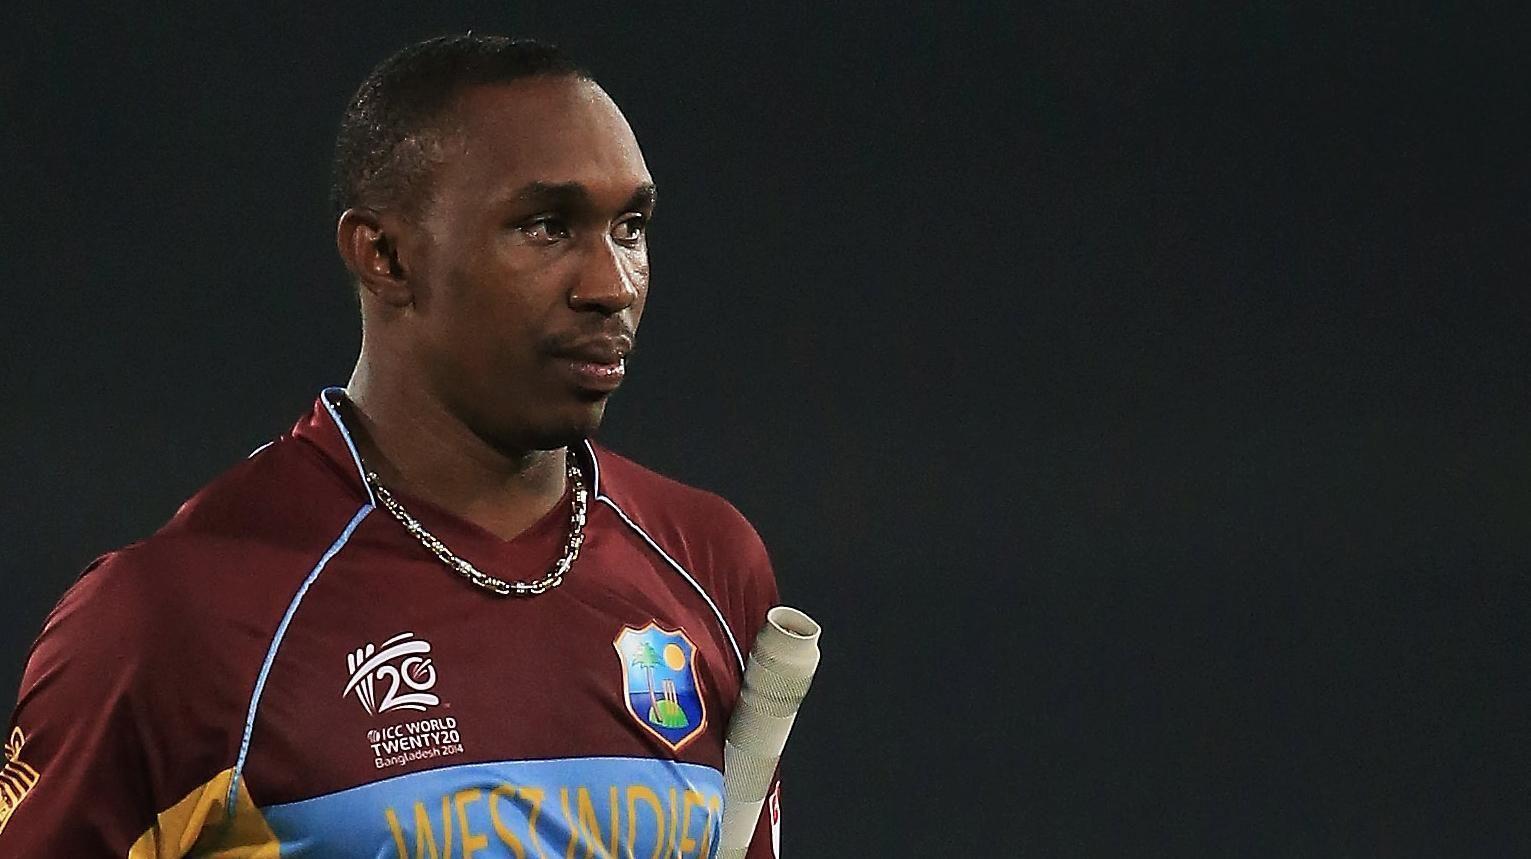 News and Analysis, West Indies news. 'More honesty needed at WICB